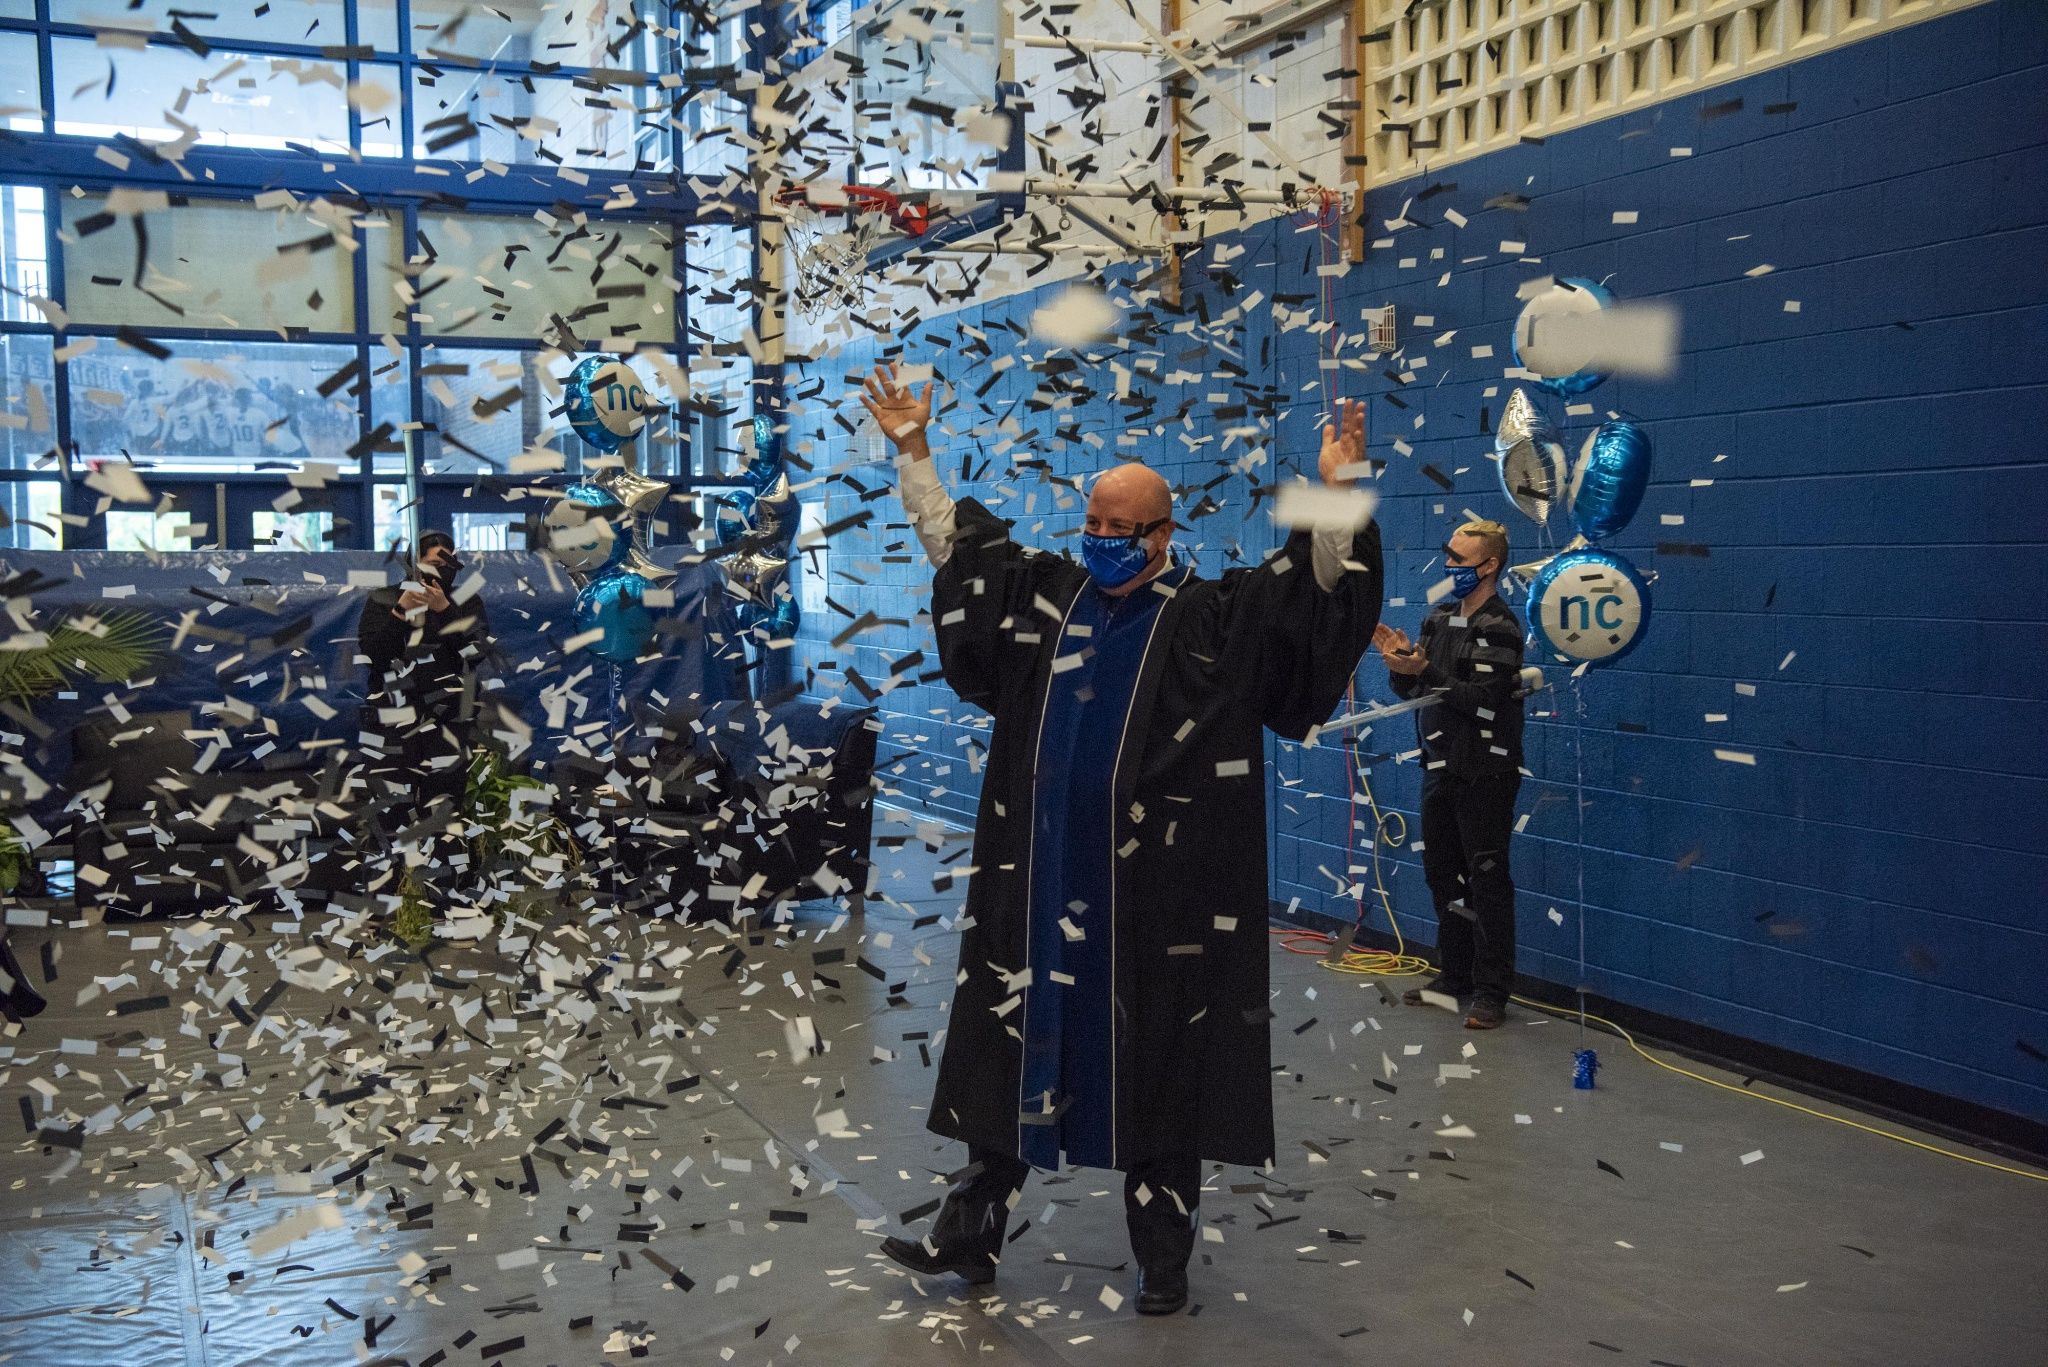 NC President Sean Kennedy excitedly celebrating Convocation in the gymnasium surrounded by balloons and falling confetti